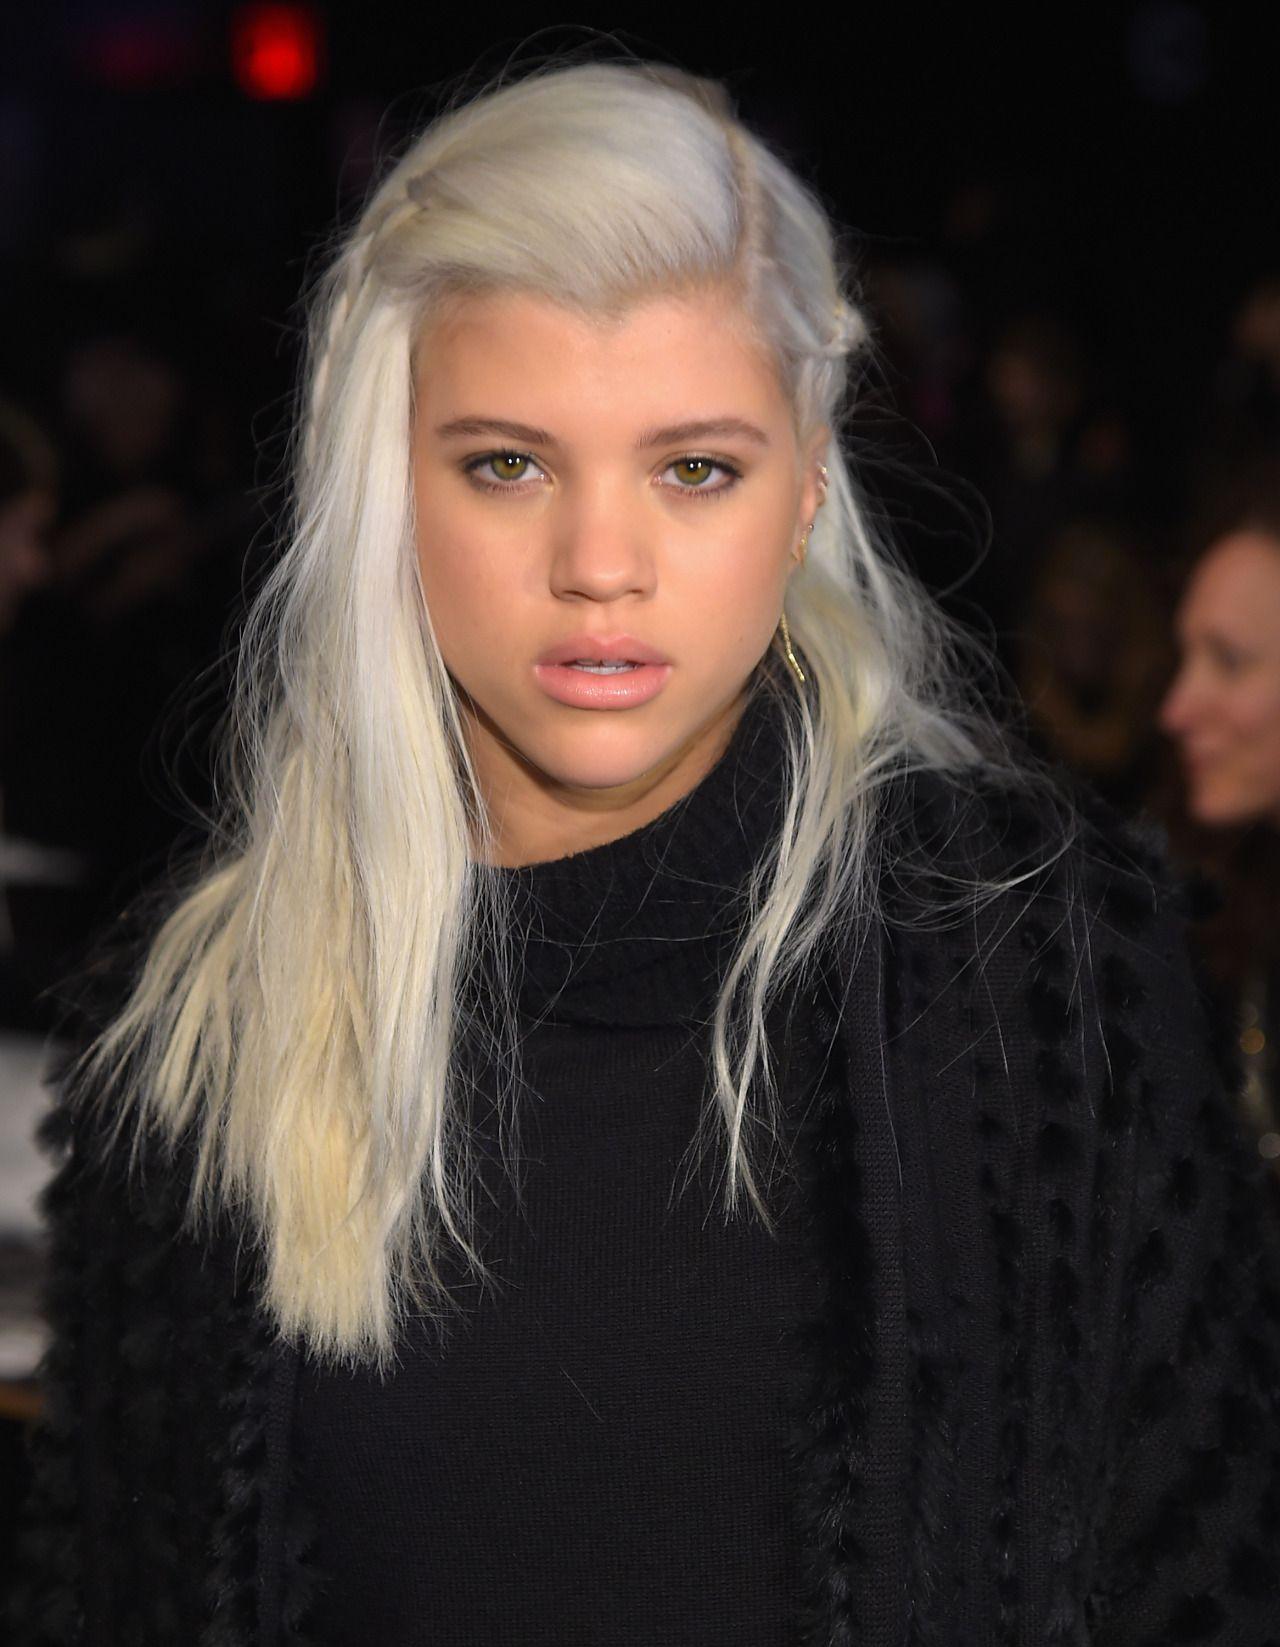 Sofia Richie Attends The DKNY Fashion Show During Mercedes Benz